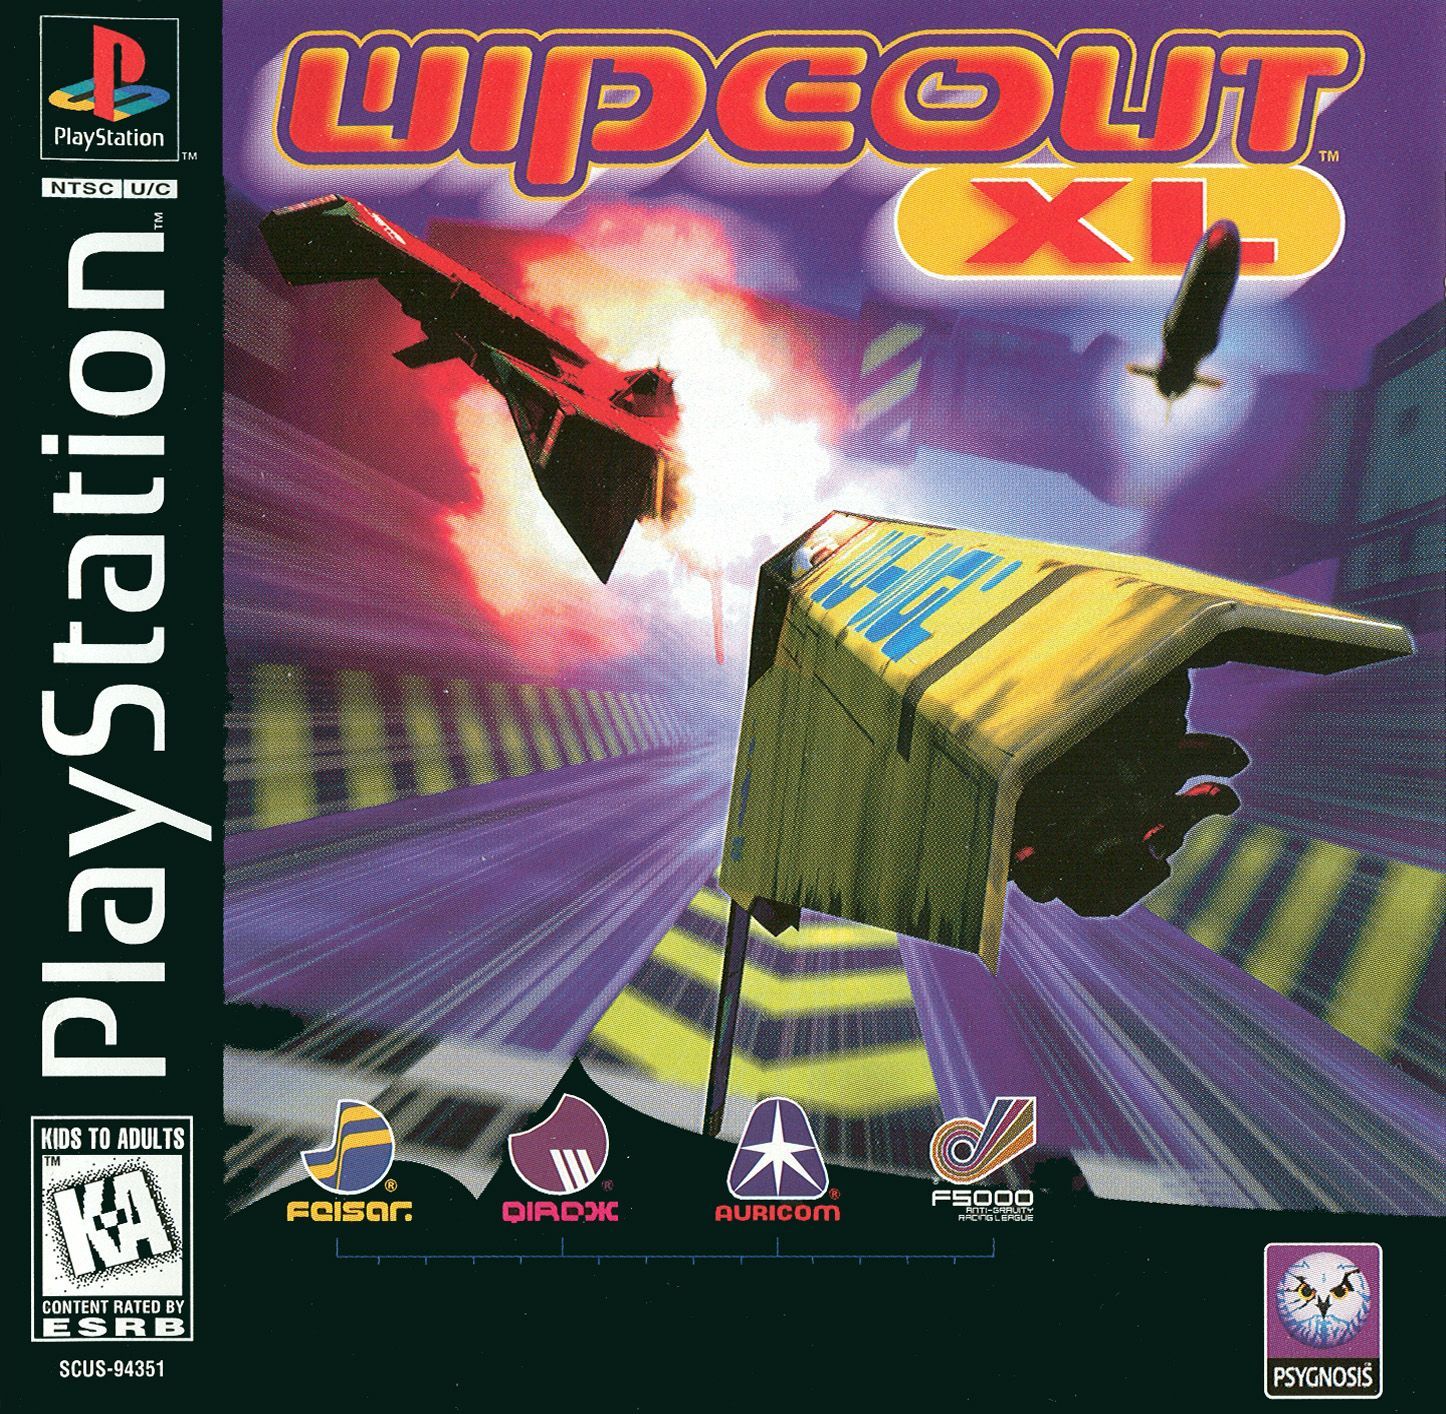 download wipeout 2020